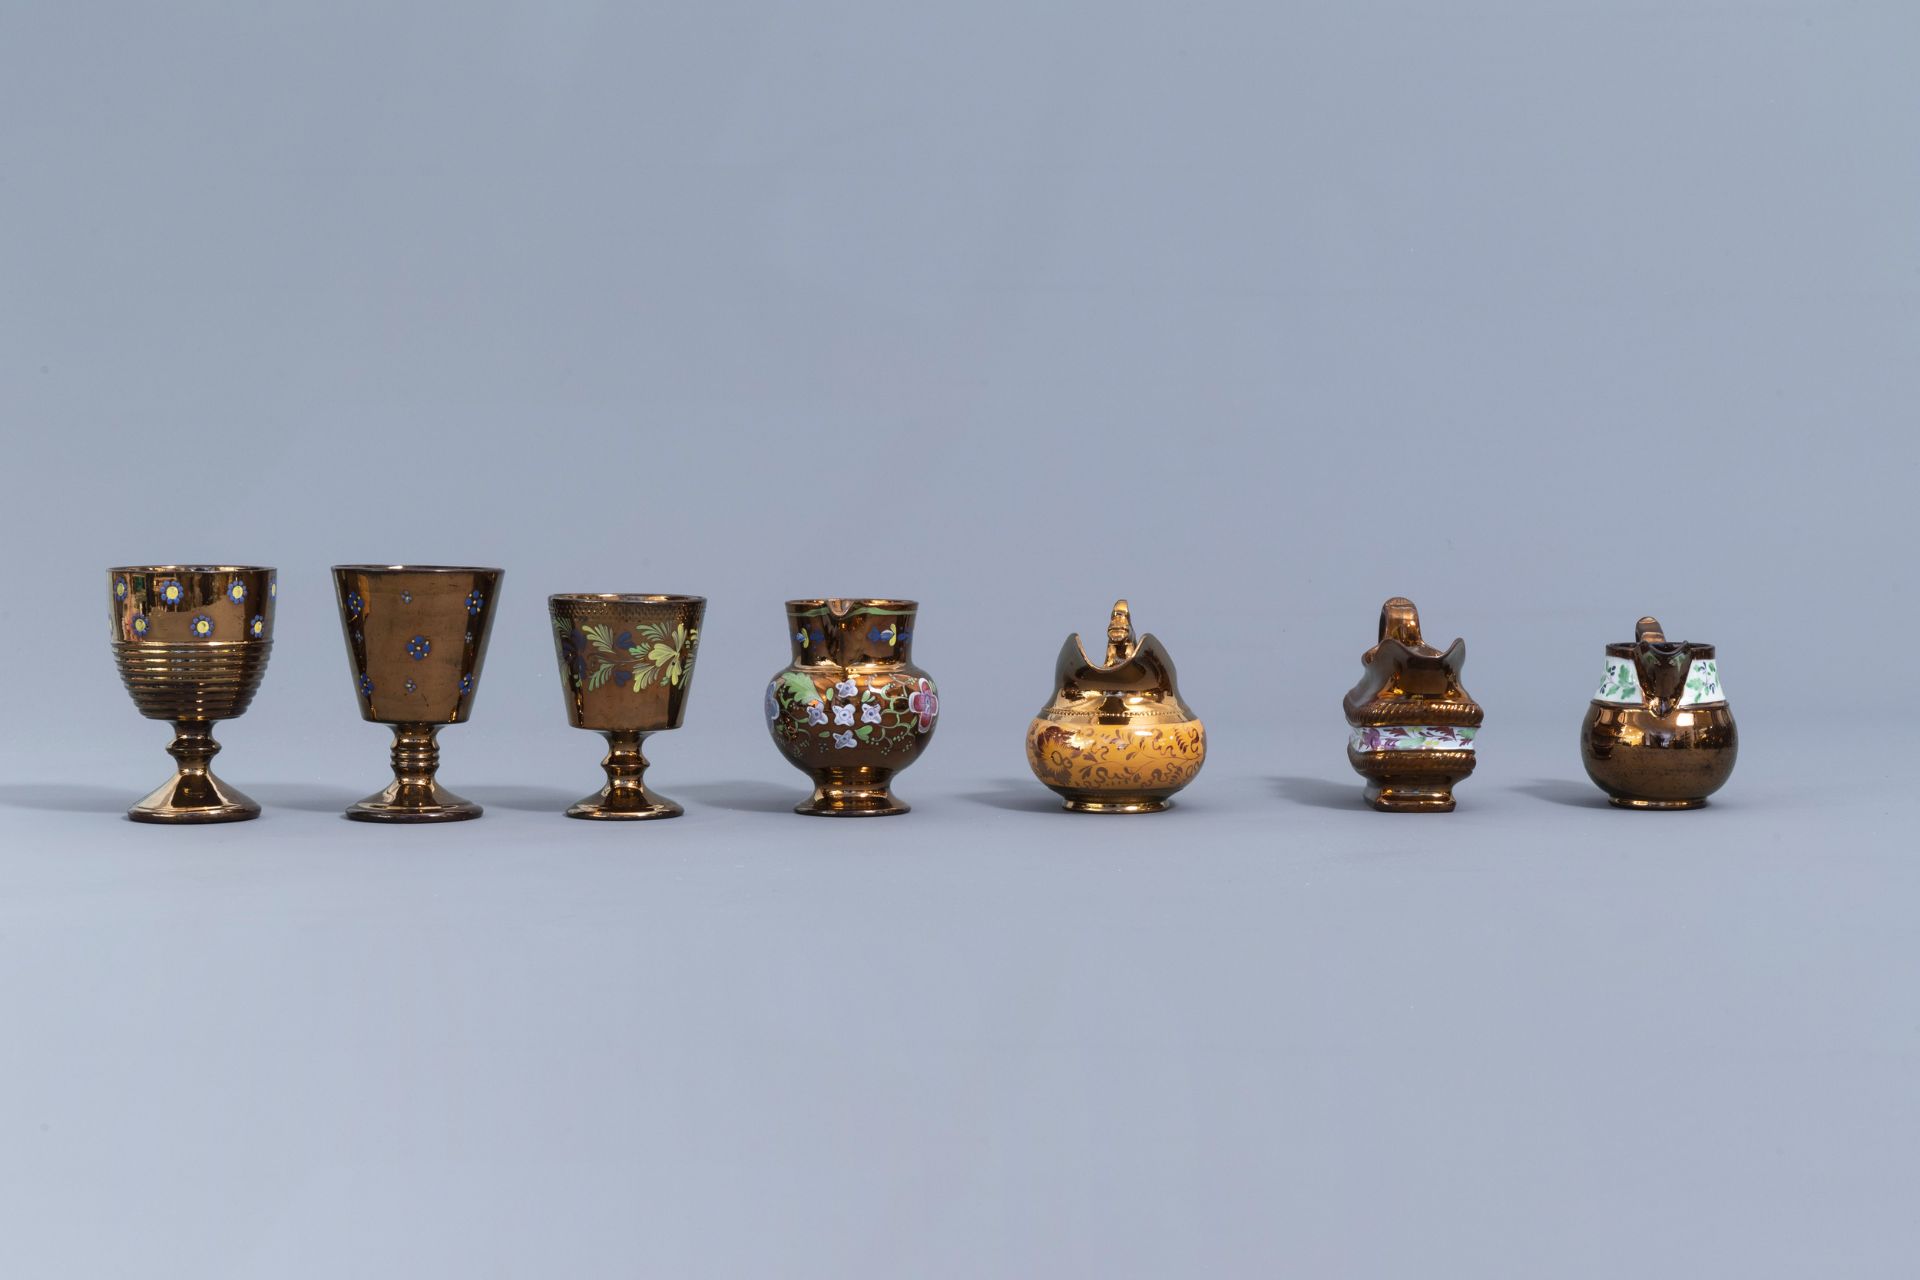 A varied collection of English lustreware items with polychrome floral design, 19th C. - Image 10 of 50